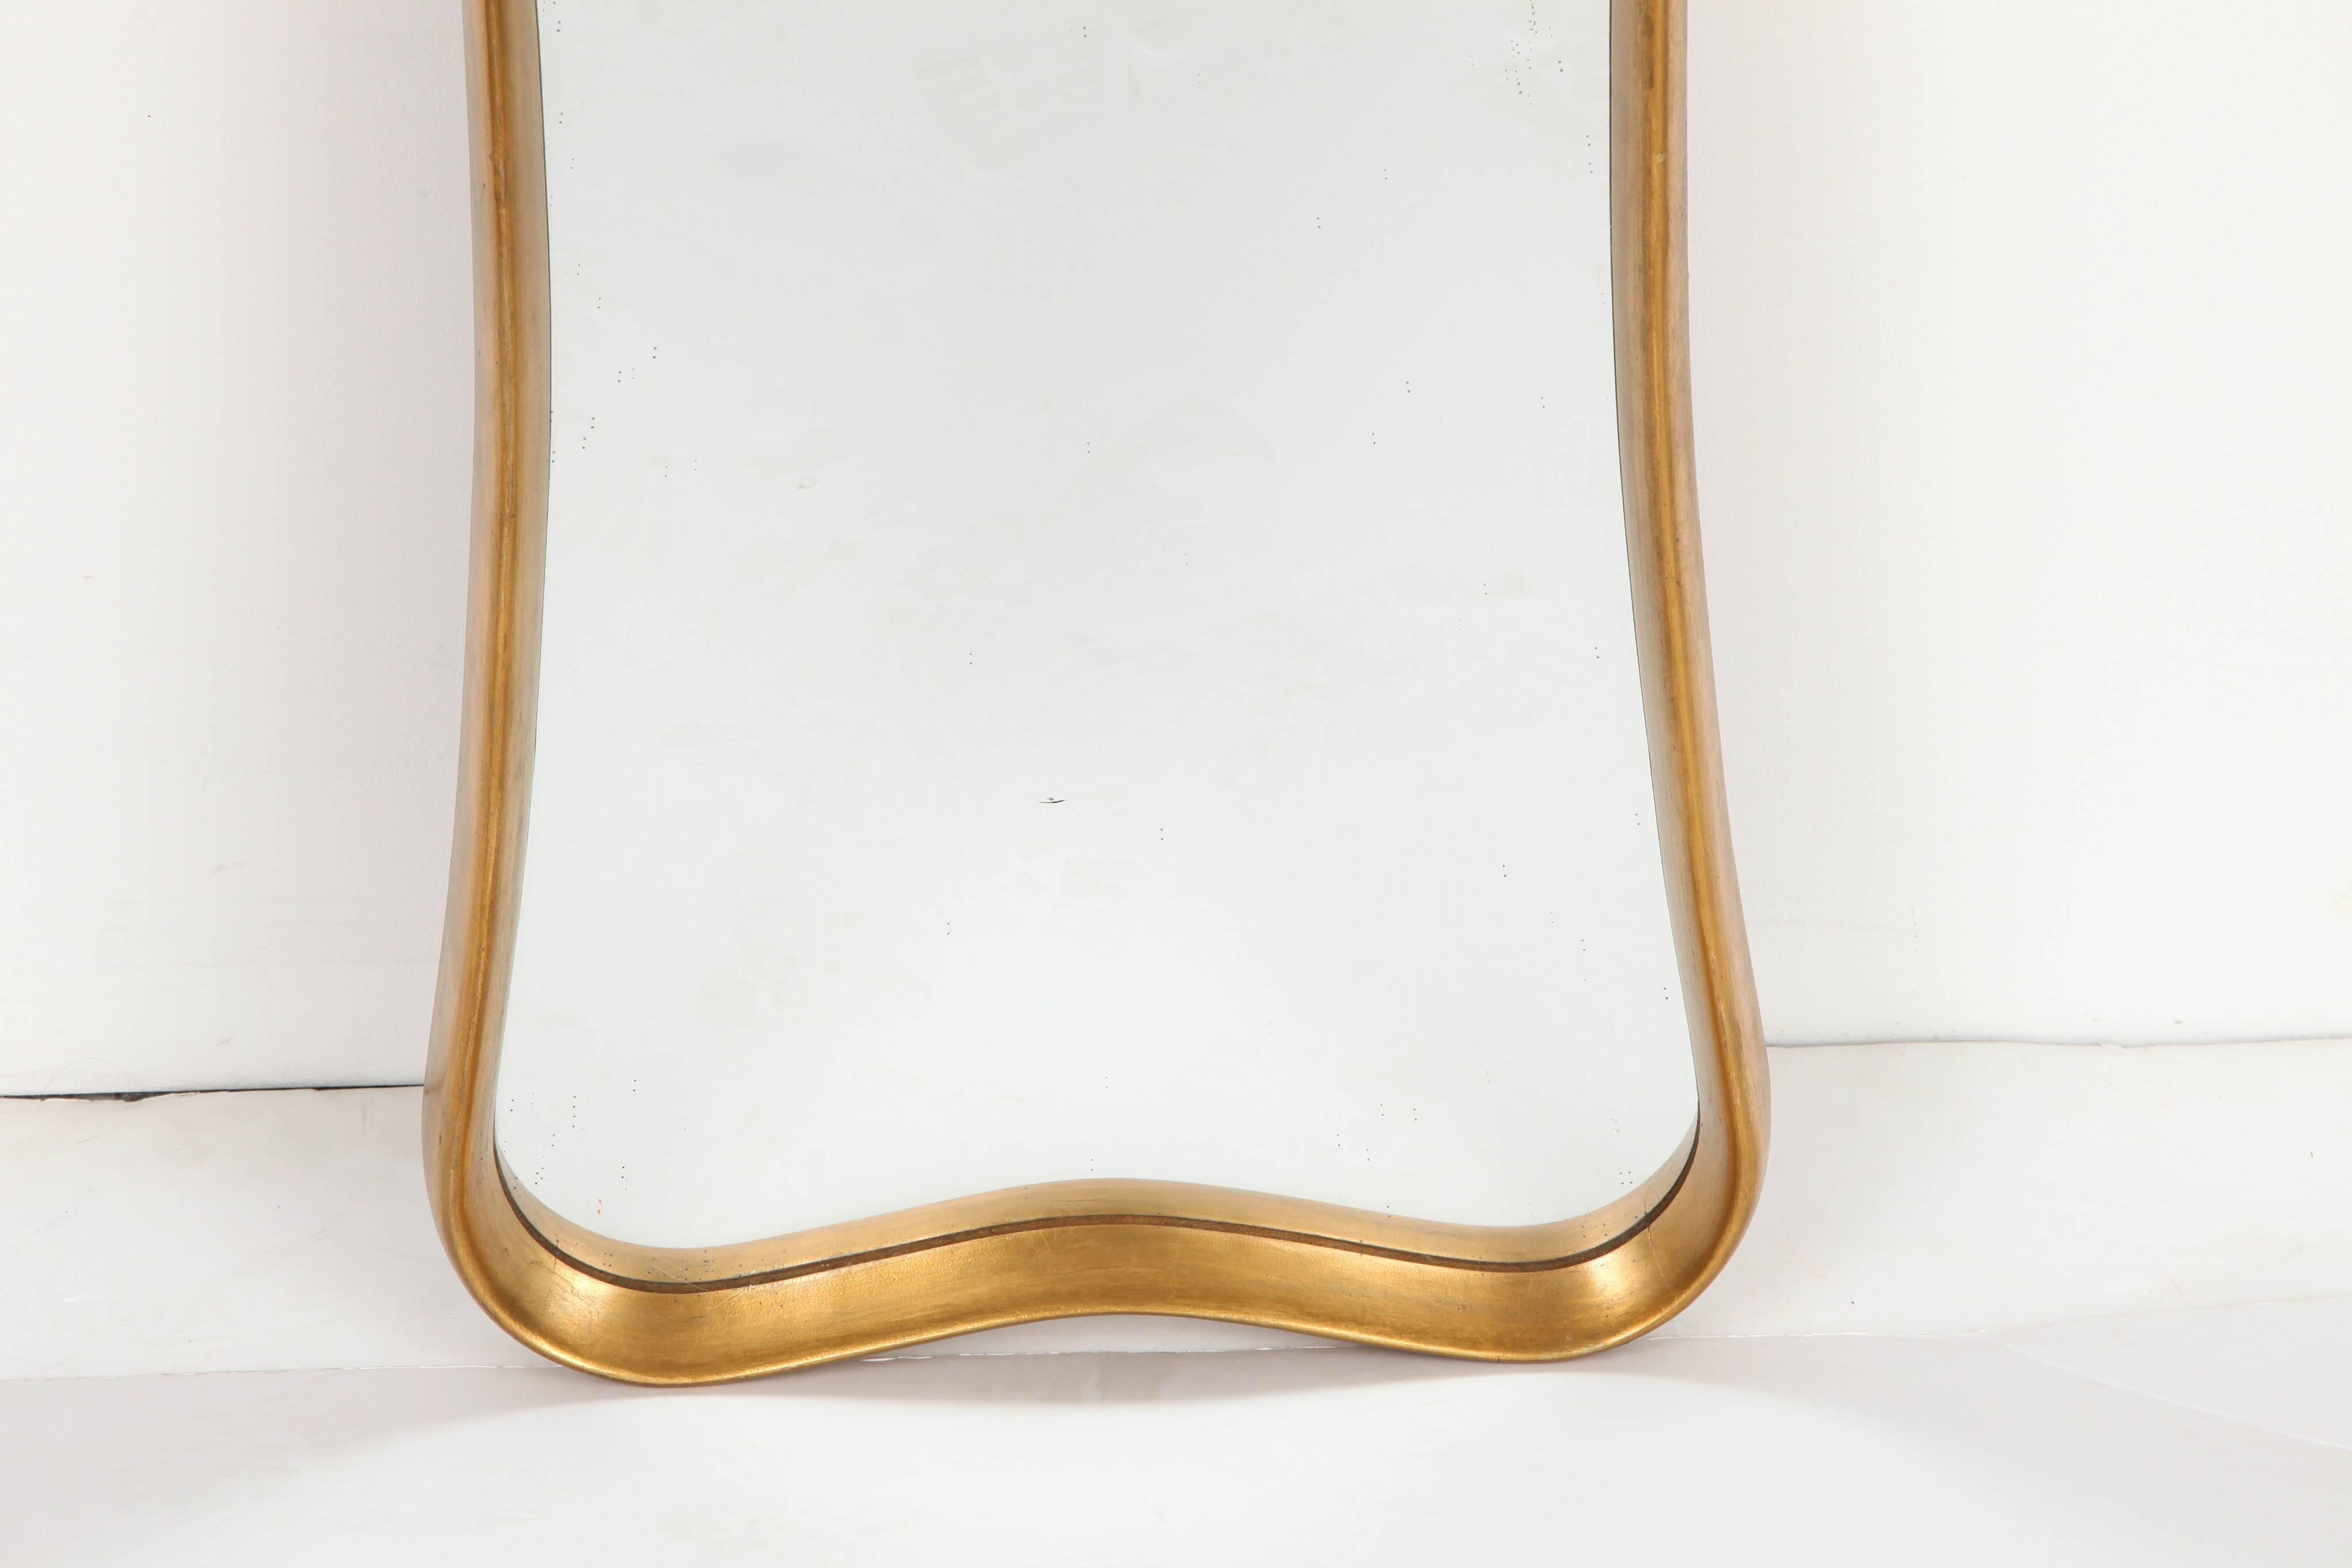 Shaped giltwood frame surrounds a conforming mirror plate, Italian, dated 1963 on reverse. Very good original condition, minor wear and losses to gilding.